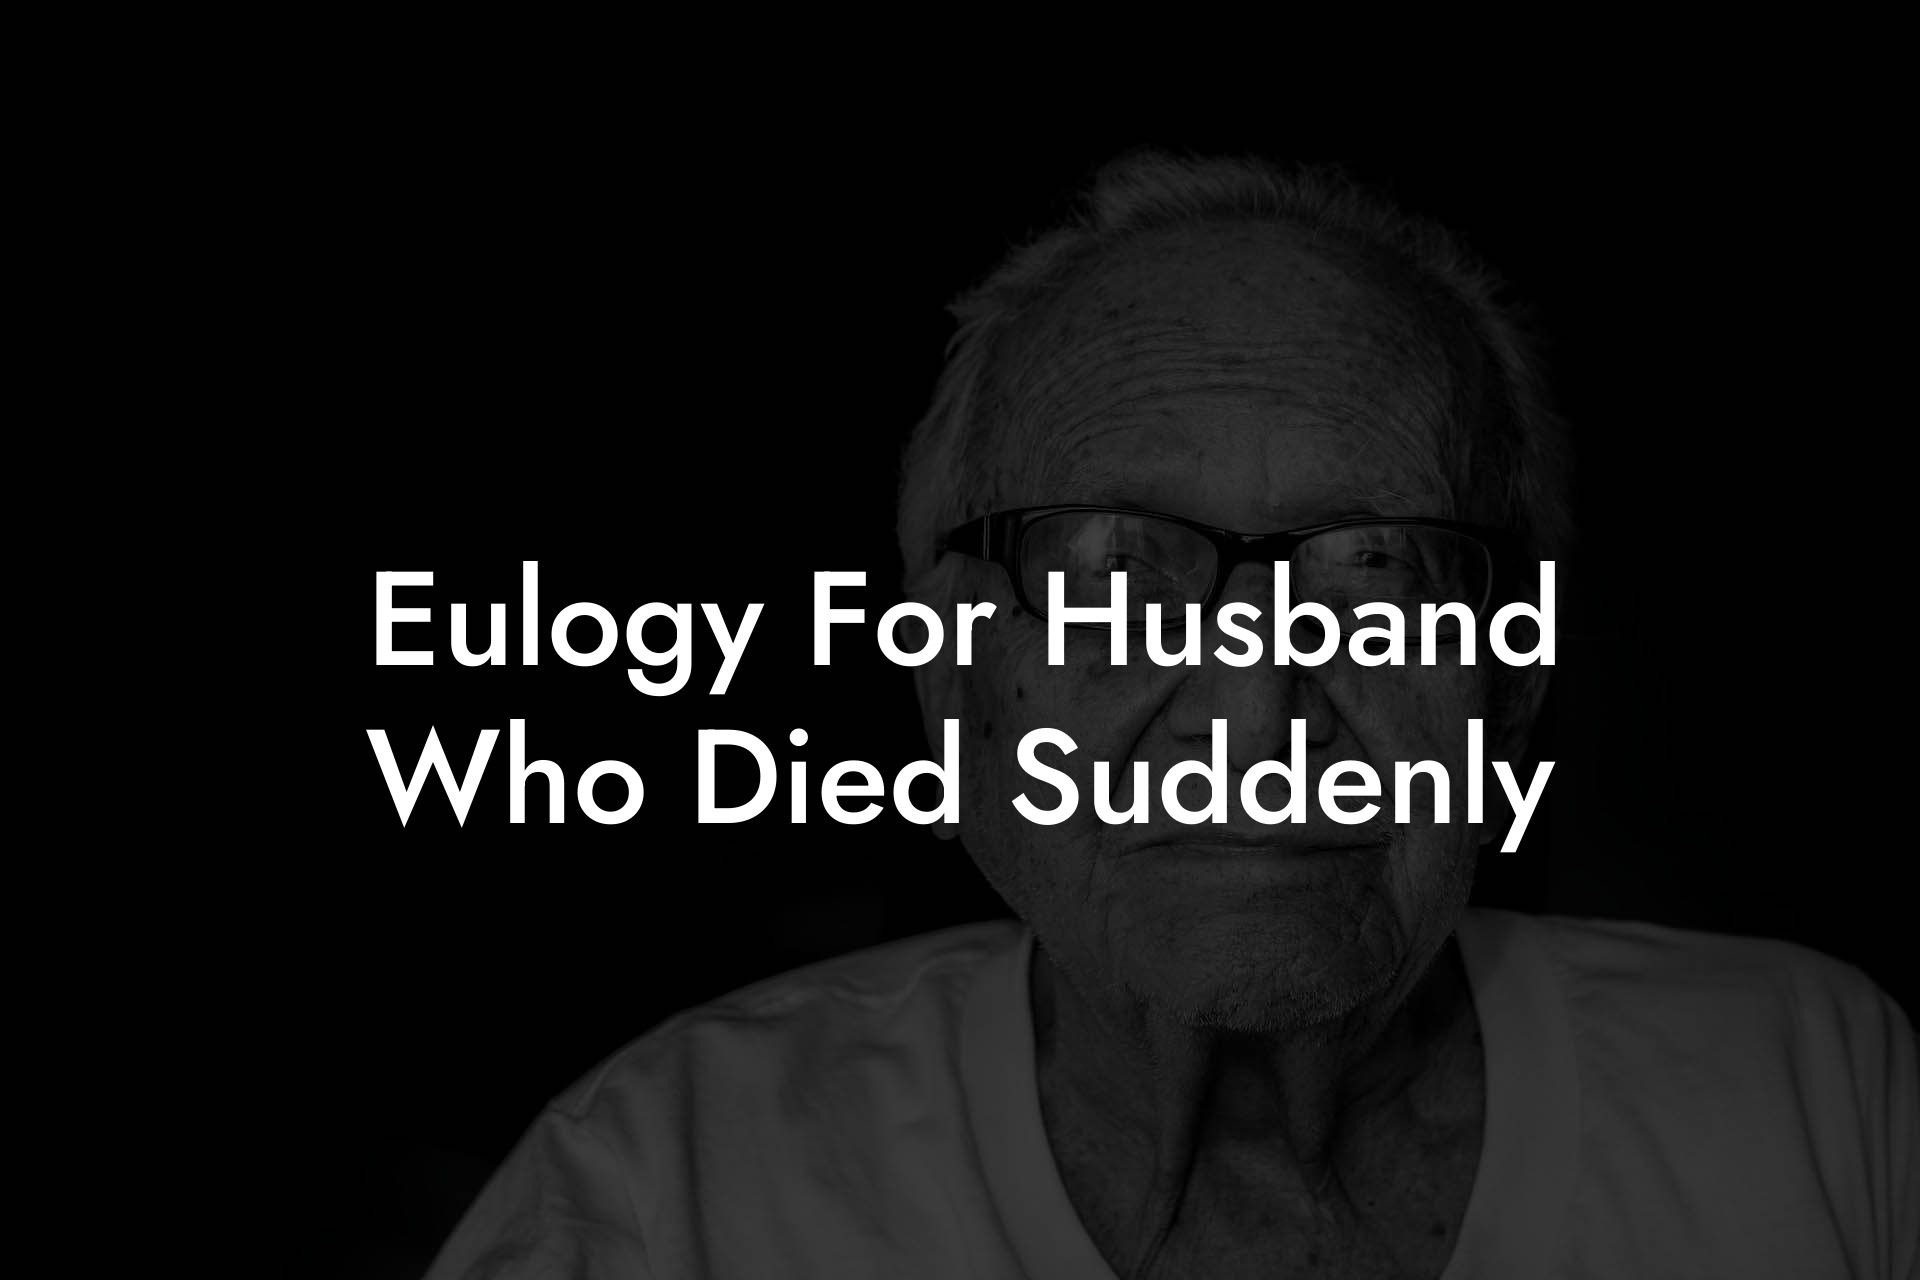 Eulogy For Husband Who Died Suddenly